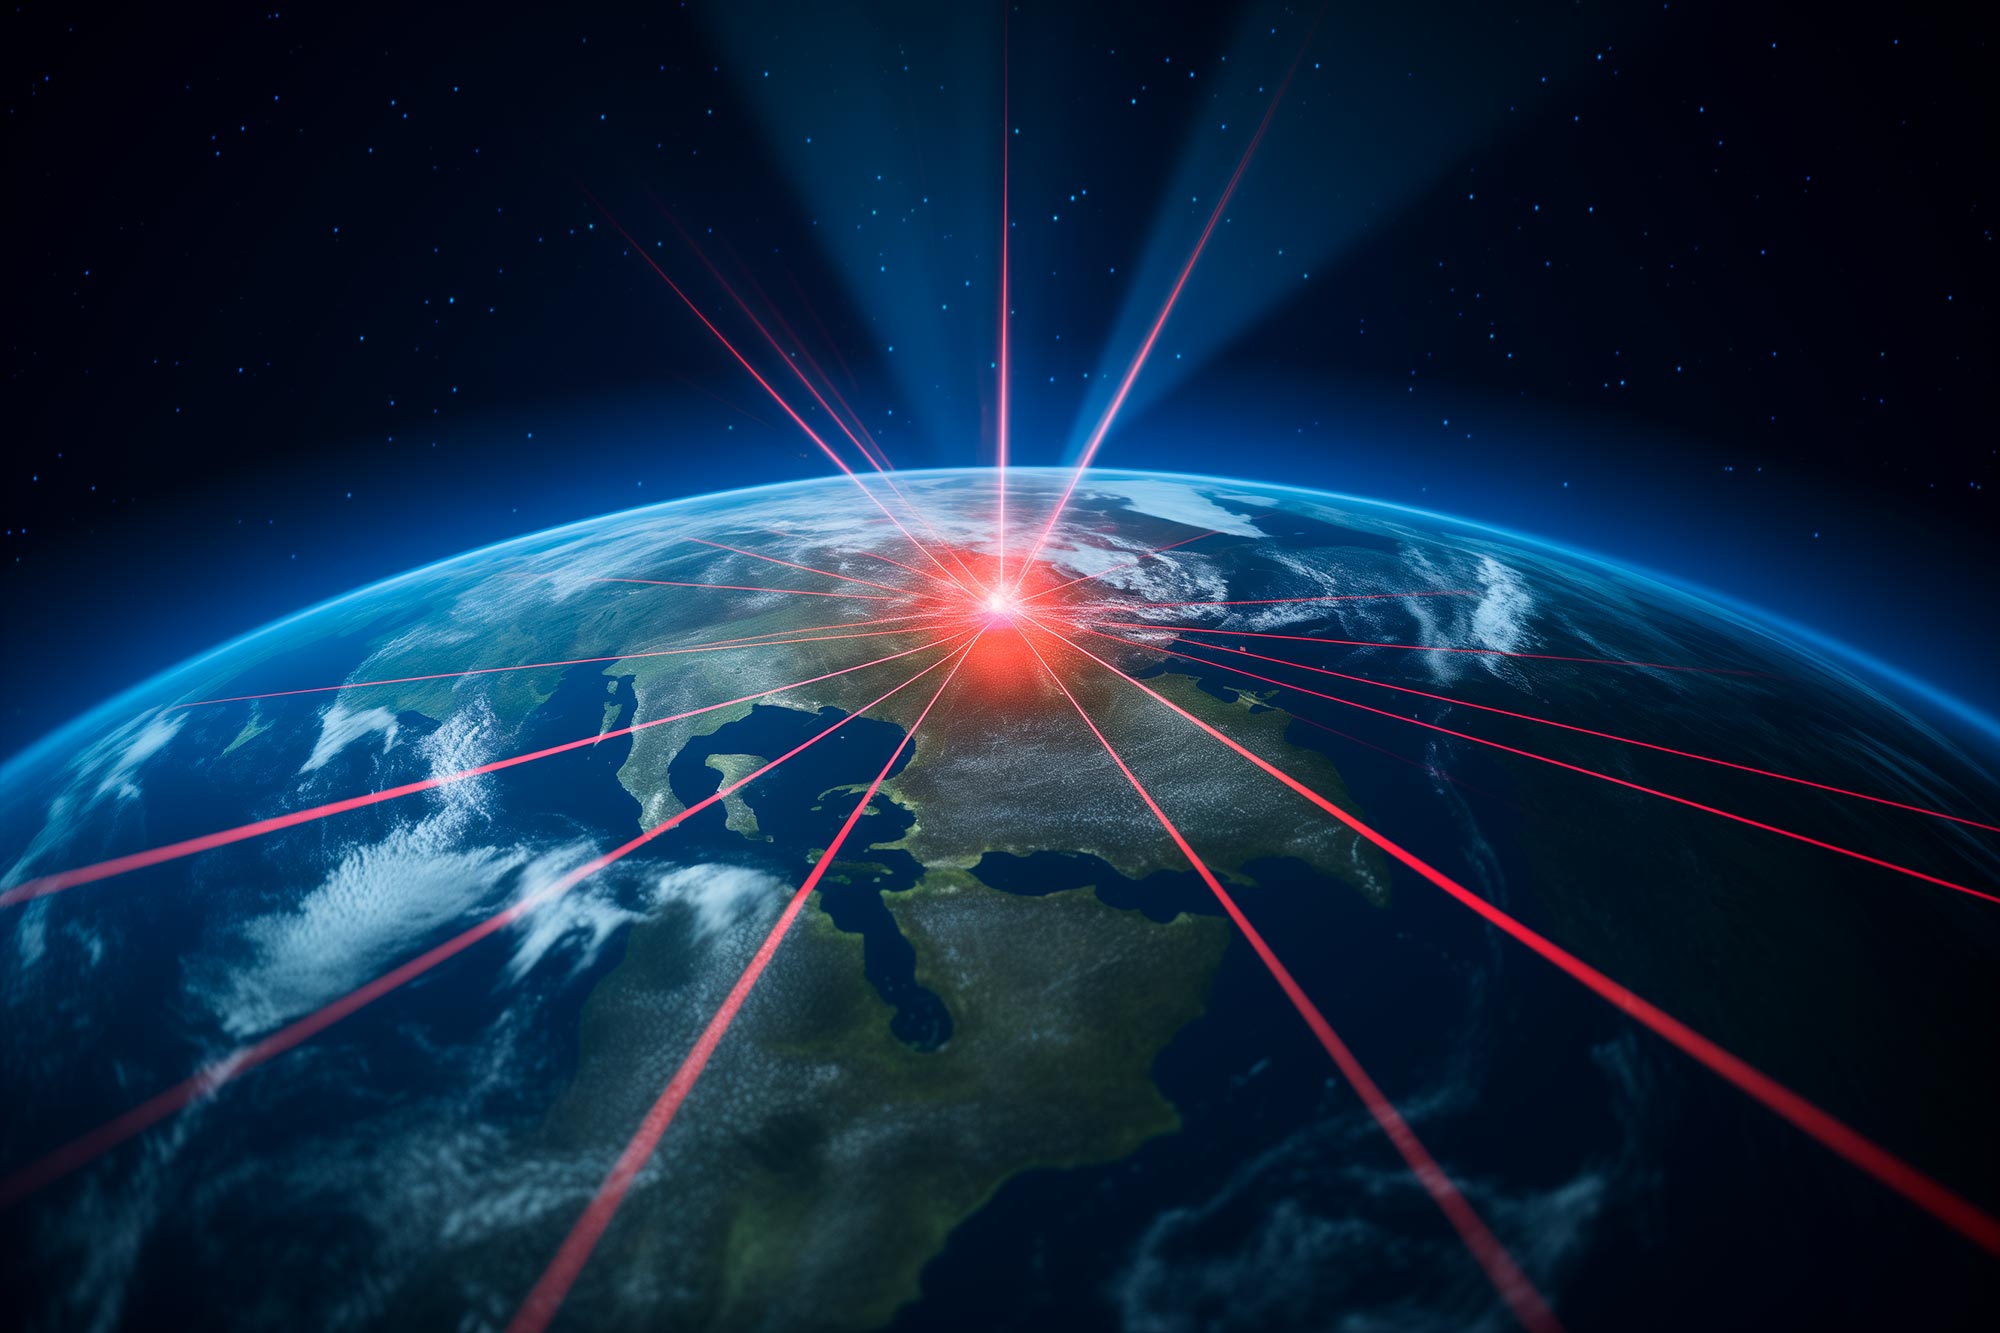 Laser beacon could help us signal alien civilizations up to 20,000 light years away, MIT says